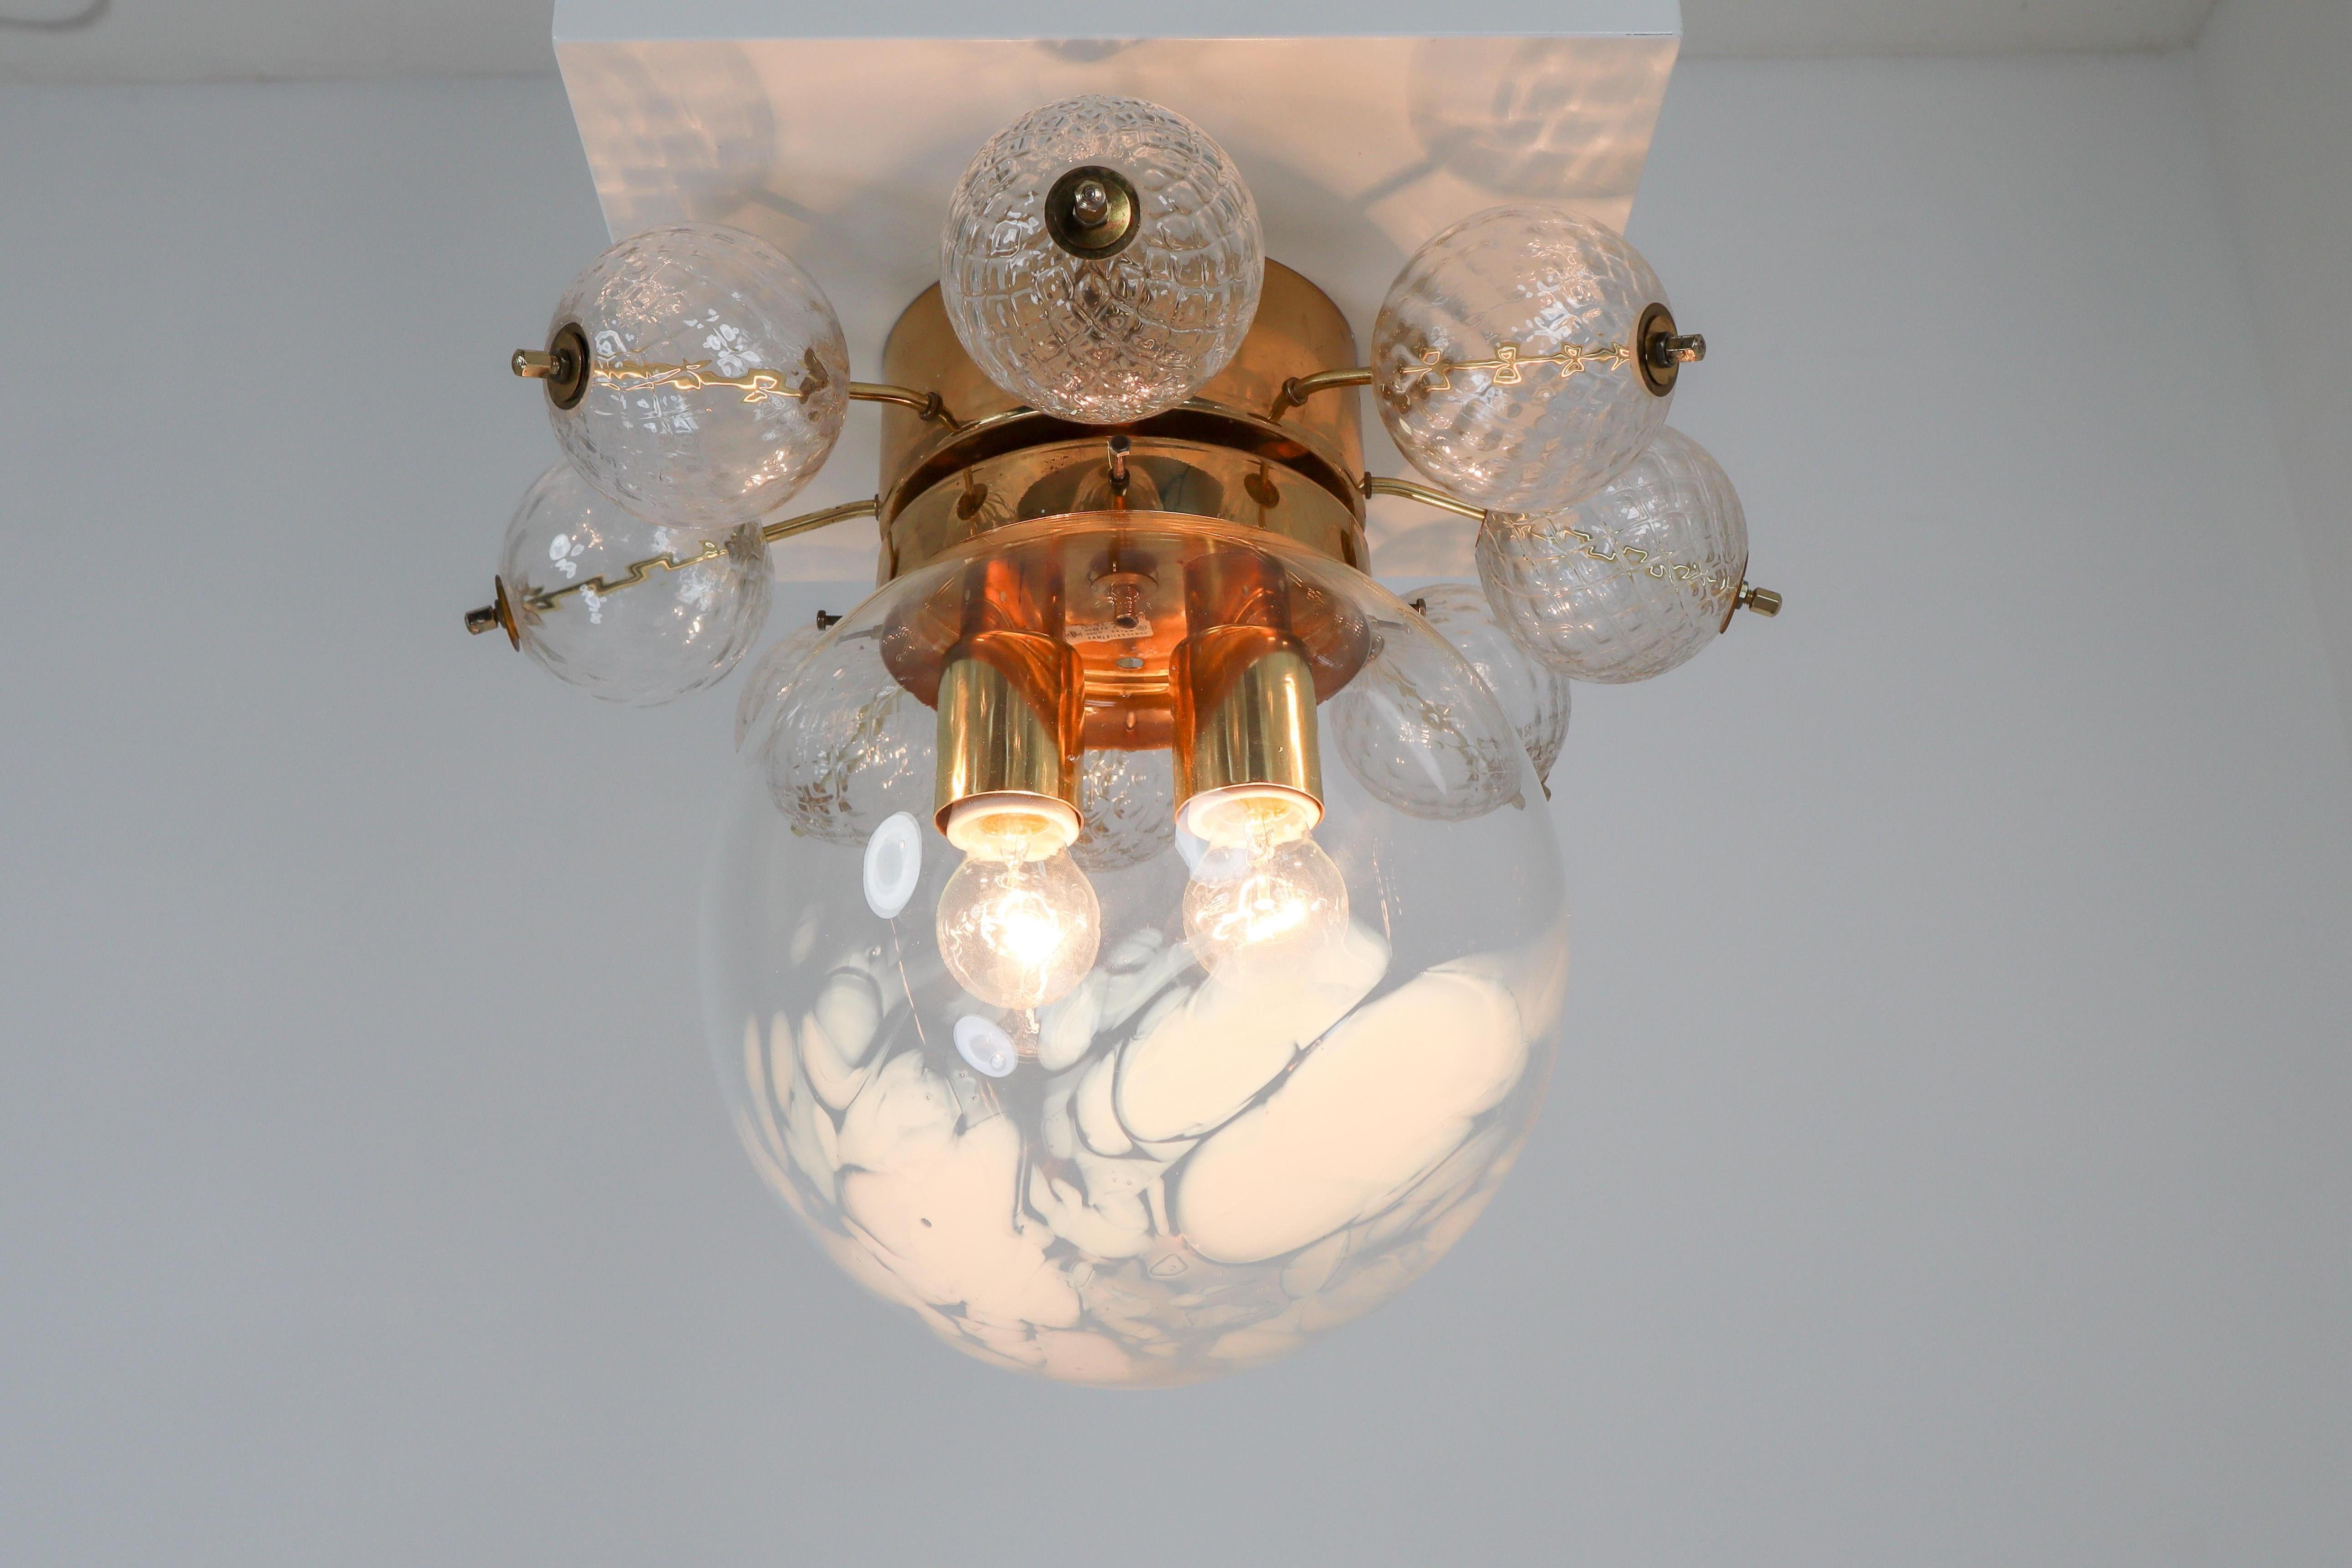 Large ceiling lamp-chandeliers with brass base and large hand blown art-glass globe. These clear hand blown glass globe are decorated with white streaks. The globe show a different and unique semi transparent, diffuse surface, which looks wonderful.